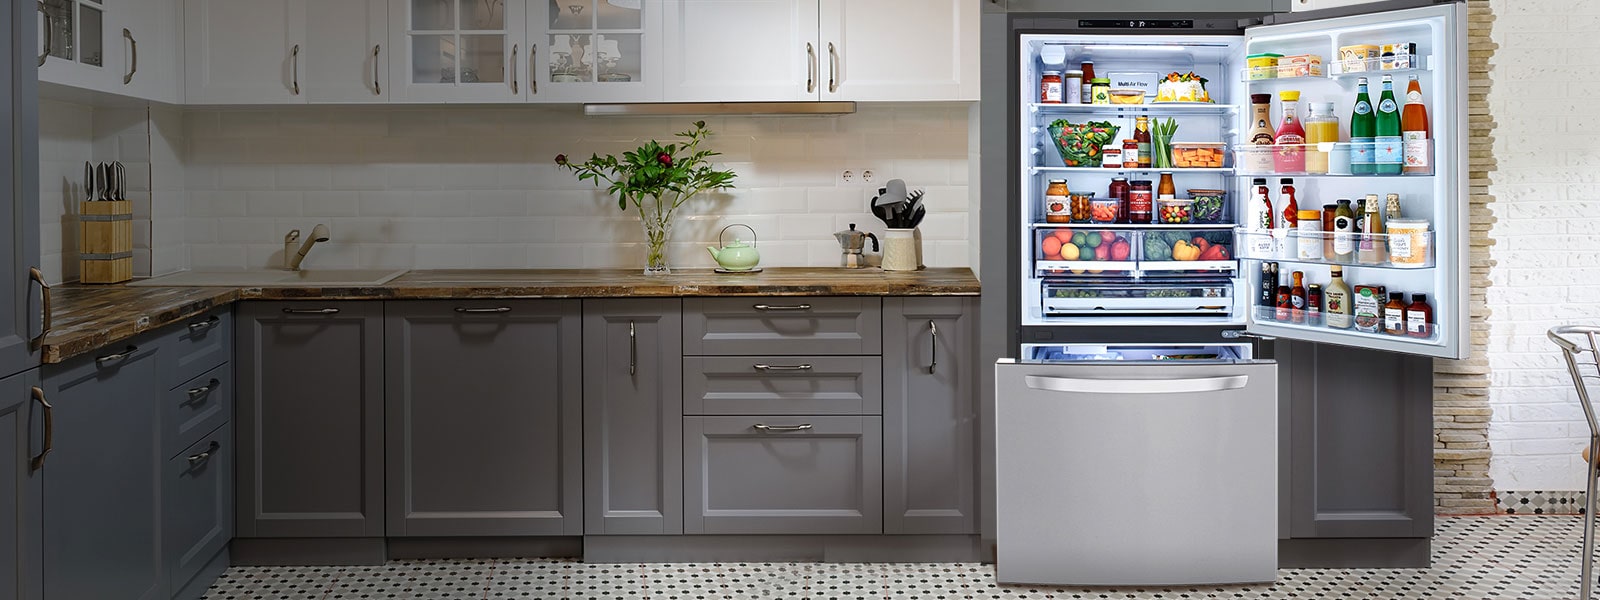 Open LG Refrigerator filled with food highlighted by light in a kitchen